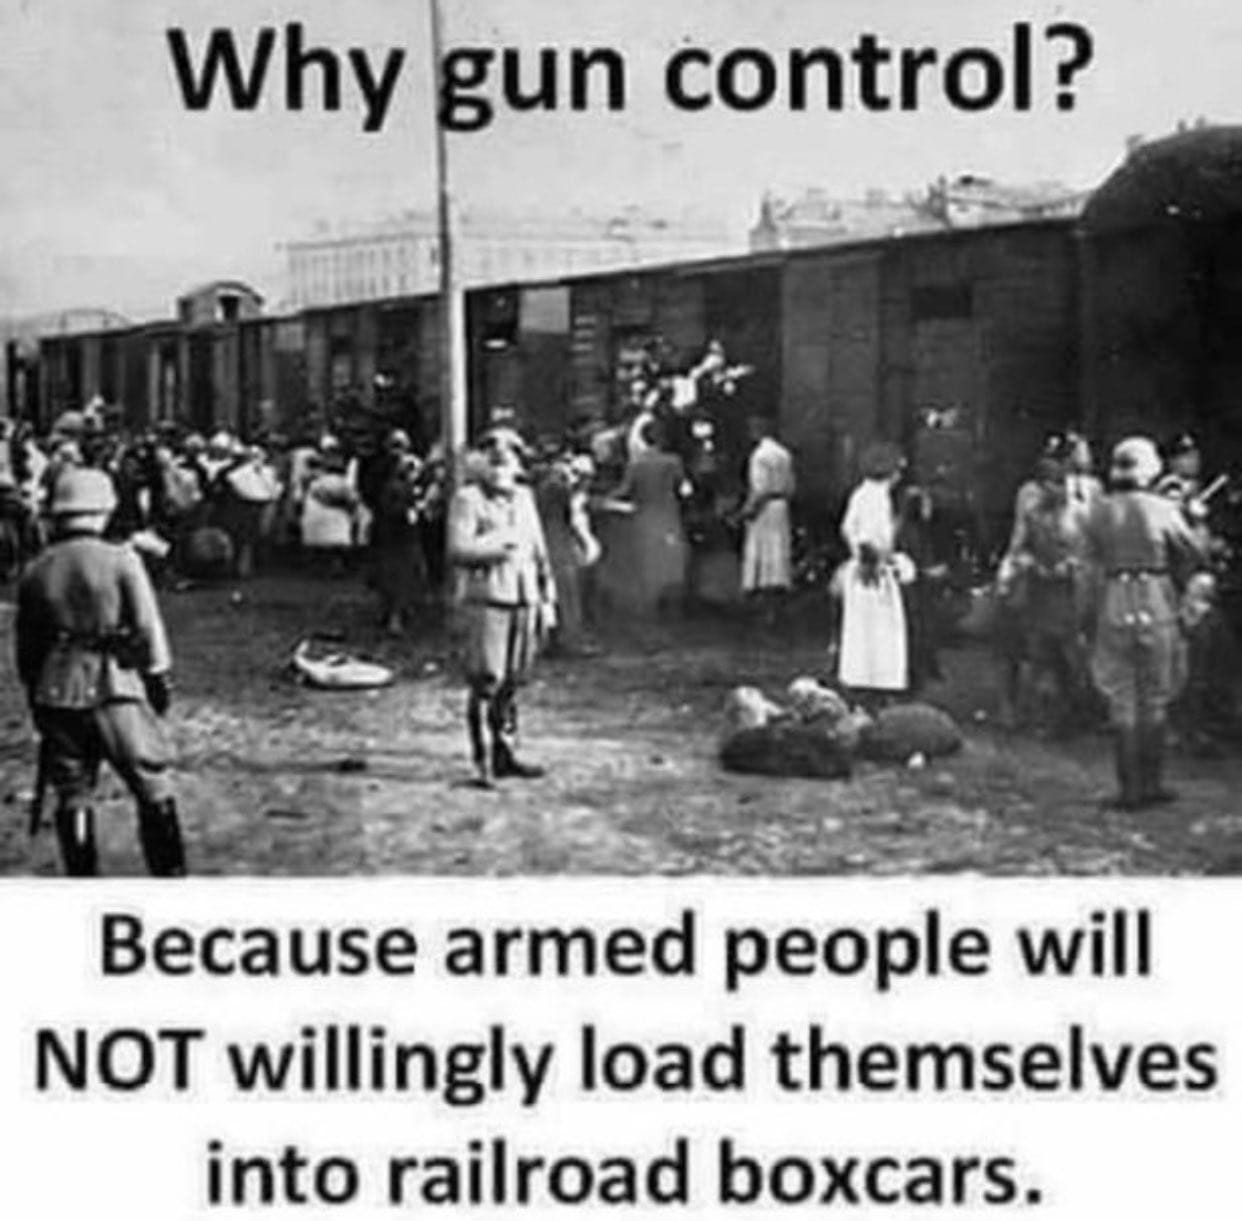 May be an image of 8 people, people standing and text that says 'Why gun control? Because armed people will NOT willingly load themselves into railroad boxcars.'